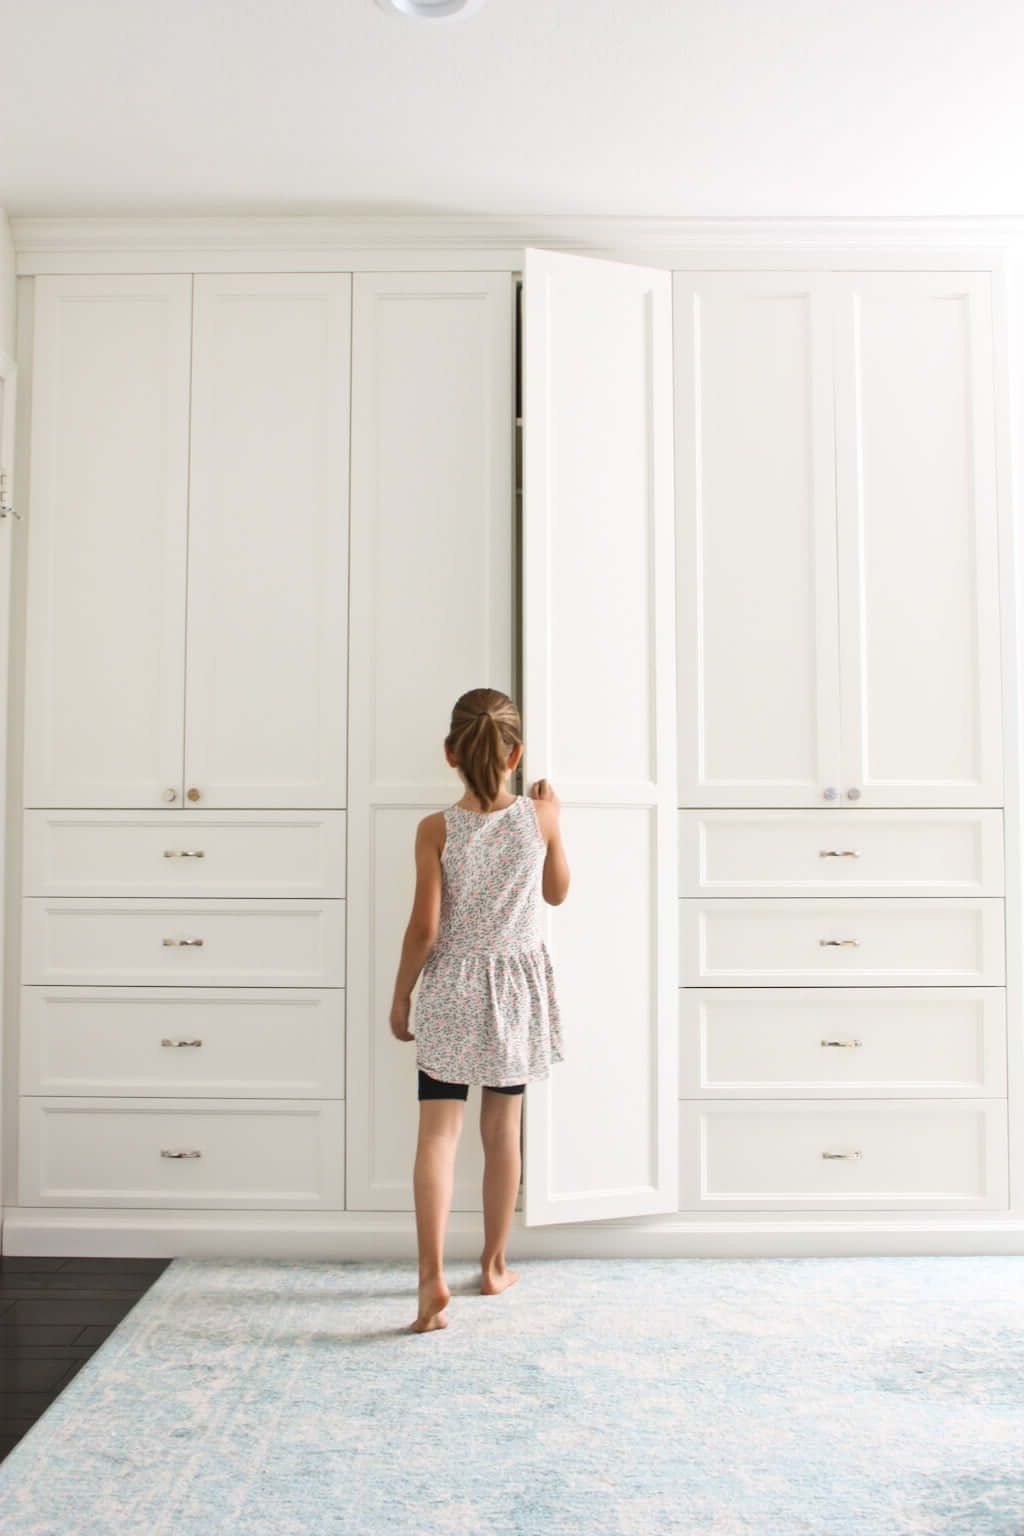 Closet Built Ins: The Genius Way To Convert Your Basic Space For Max  Storage! Regarding French Built In Wardrobes (View 18 of 20)